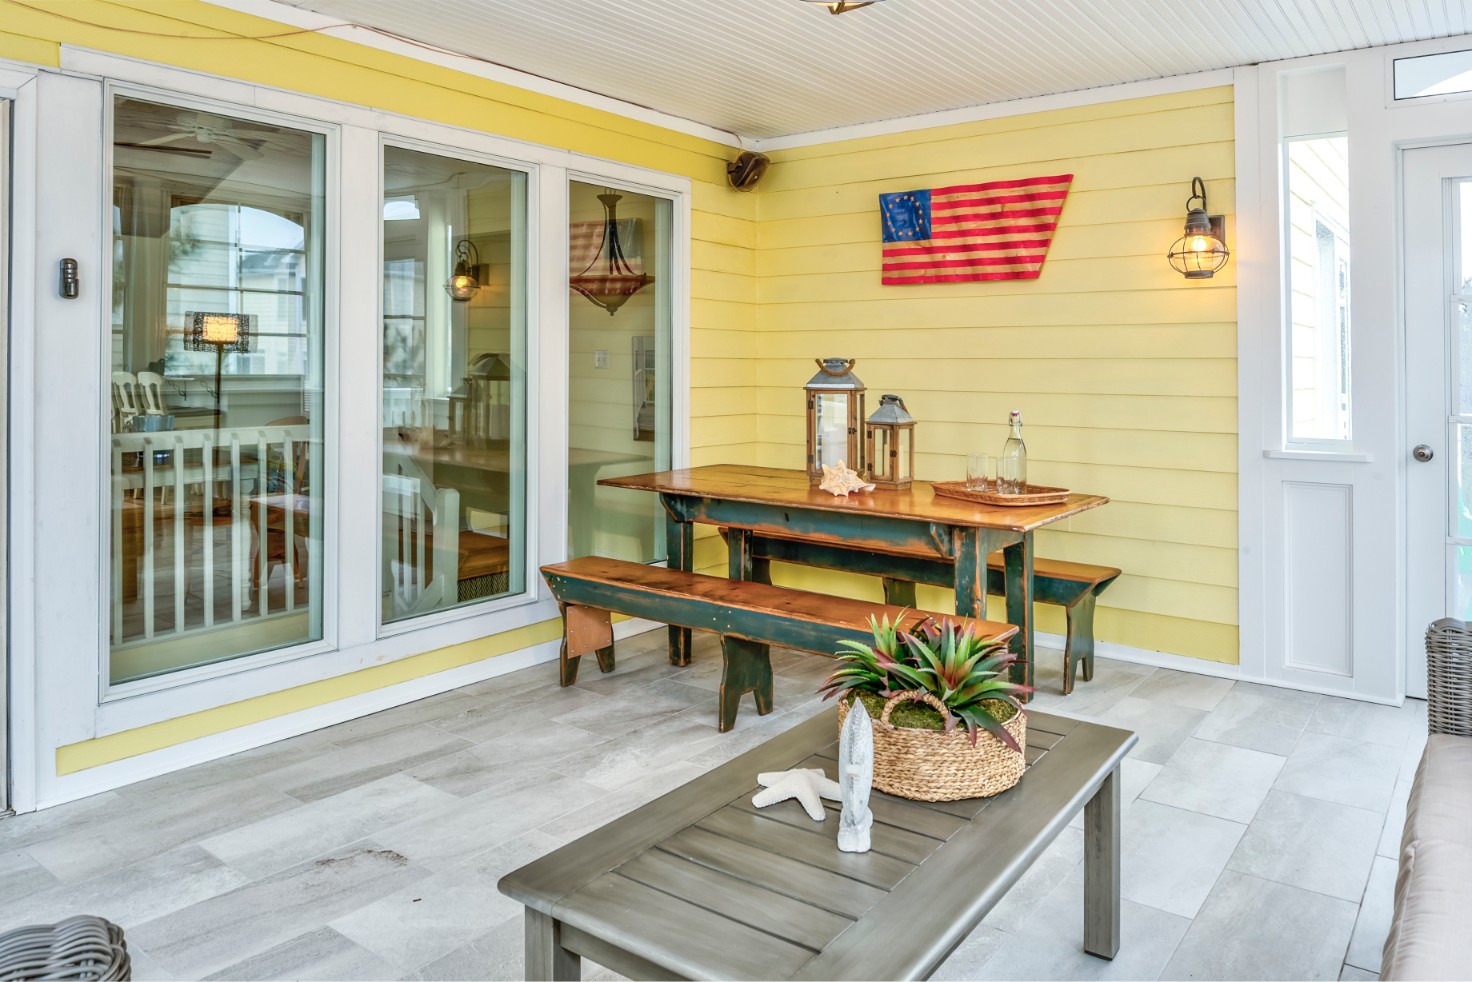 Indian Street Sunroom in Bethany Beach DE with Yellow Siding and Wooden Table and Benches